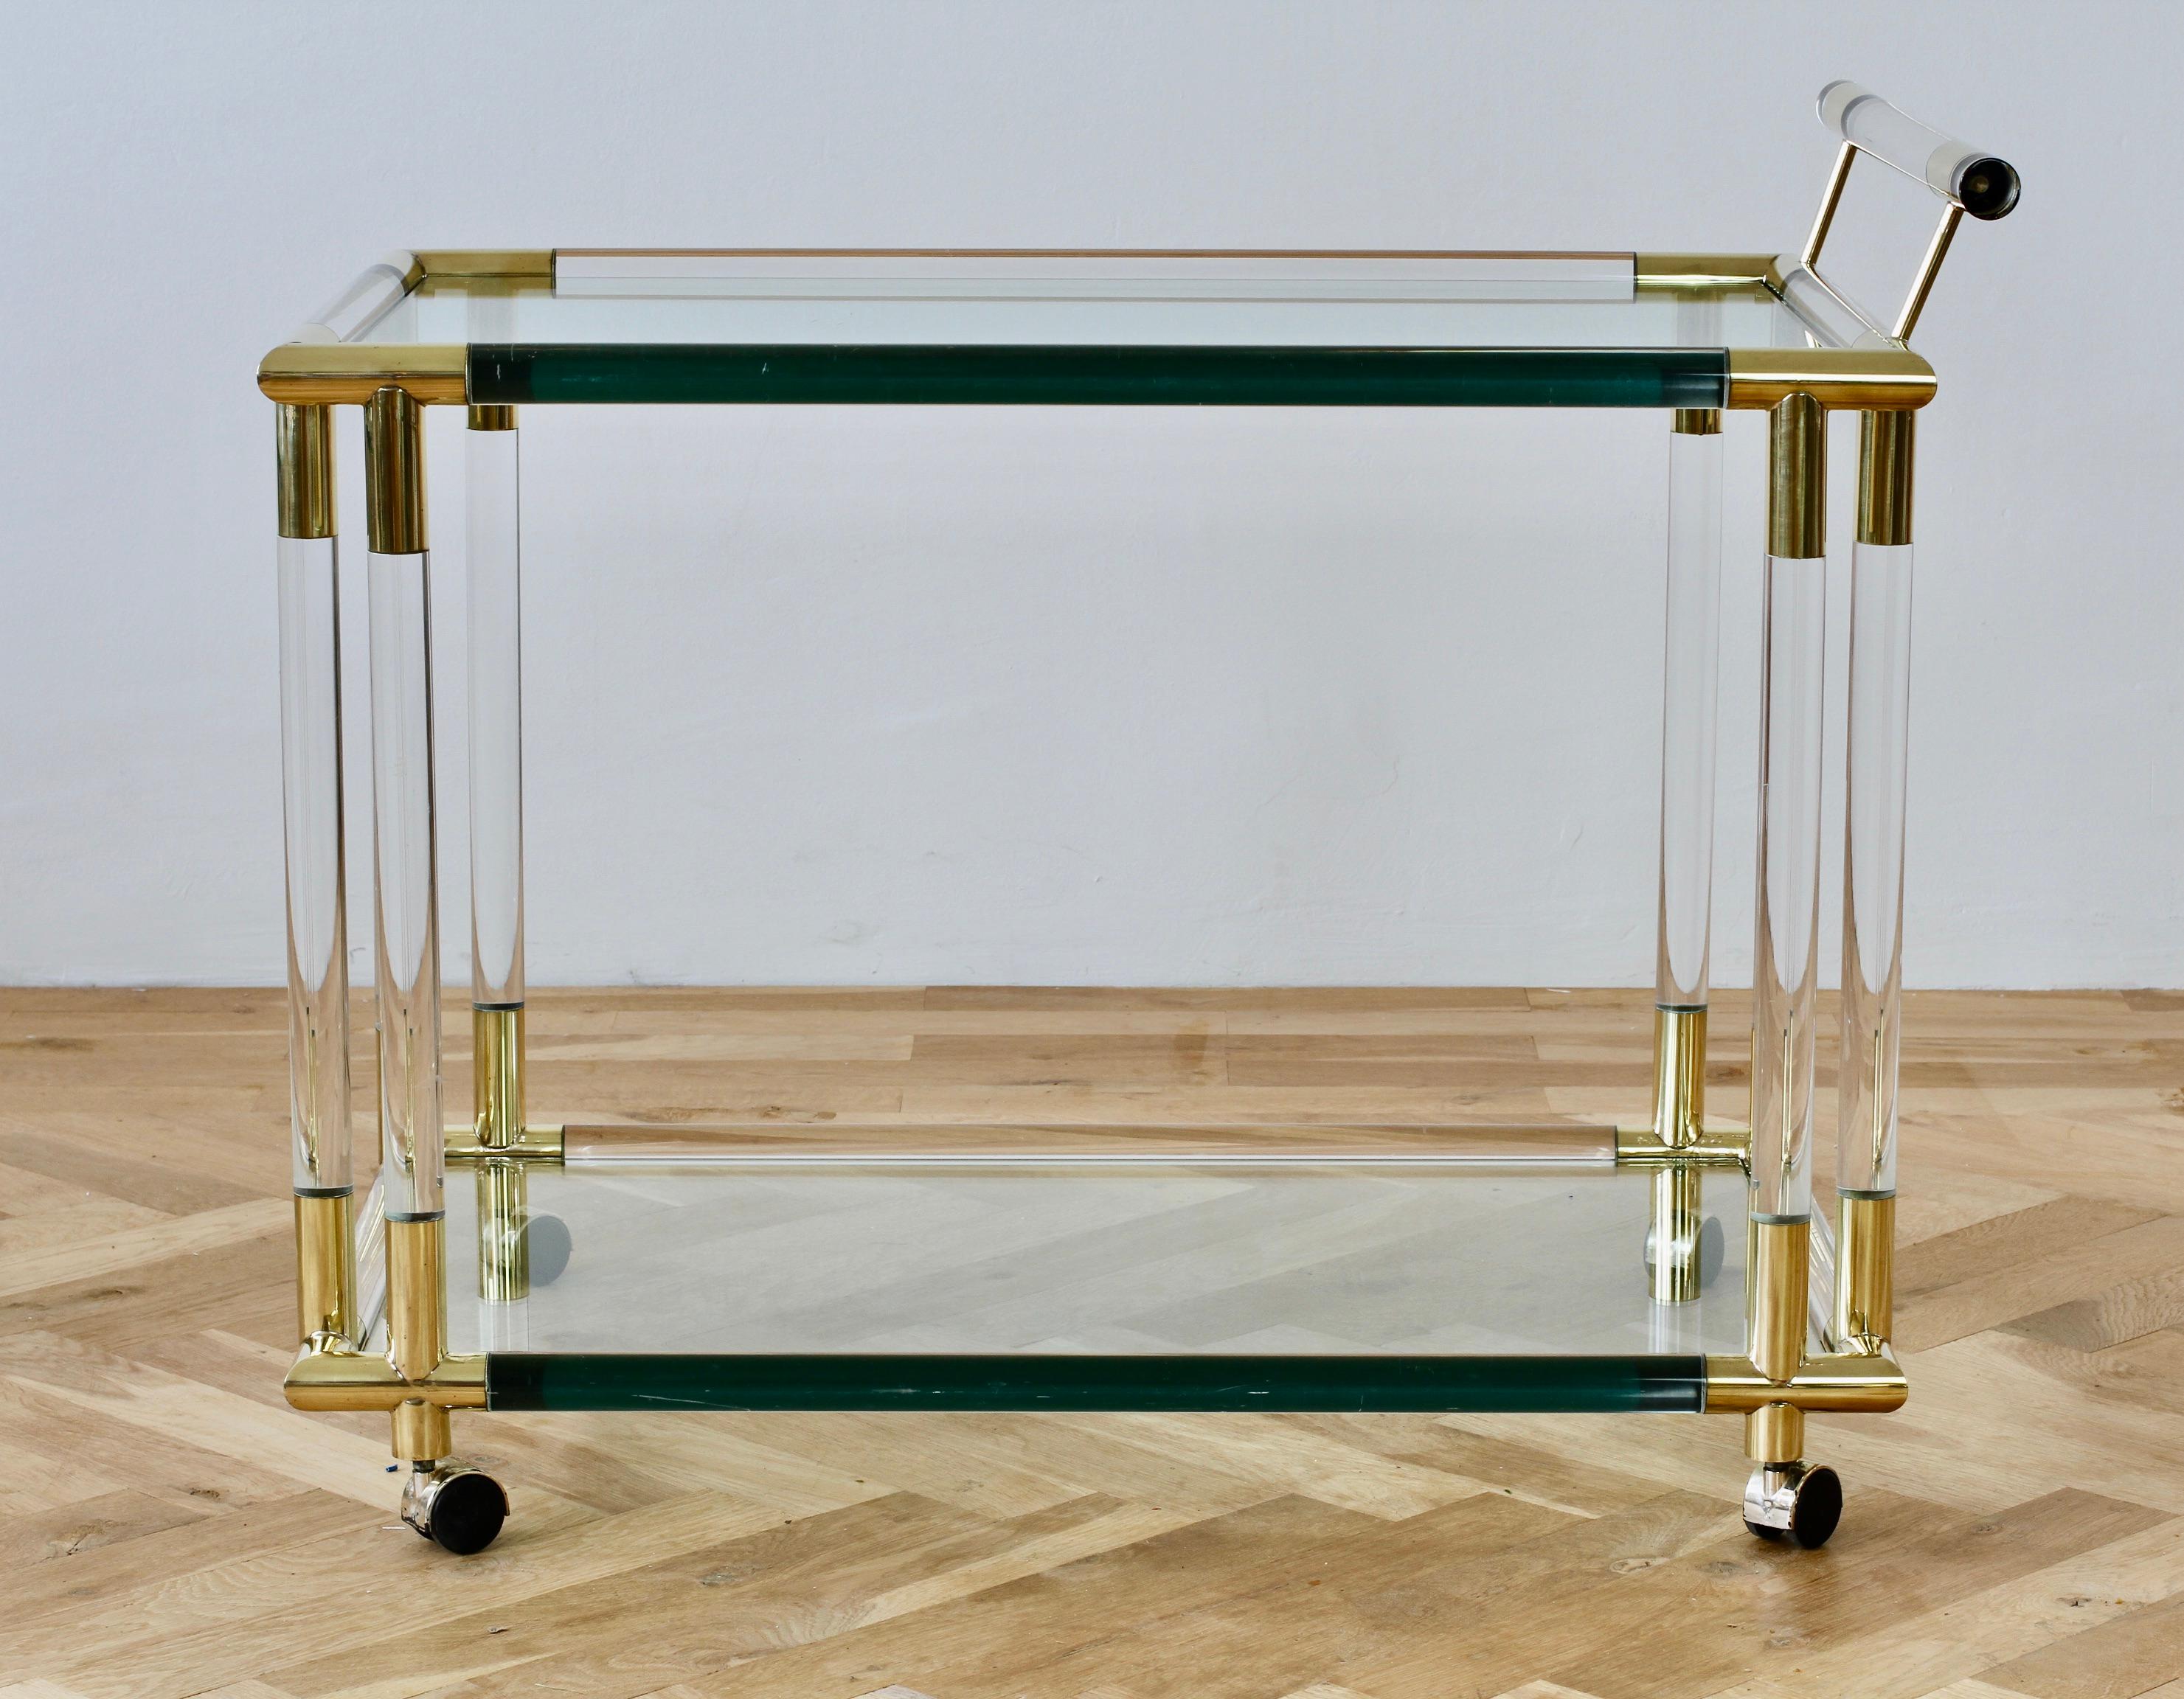 Large vintage 1970s Midcentury Italian Art Deco style double shelved bar cart, tea trolley or drinks stand on castors in the style of Charles Hollis Jones. This two-tiered serving trolley features solid round tubes of Lucite (Acrylic) with polished